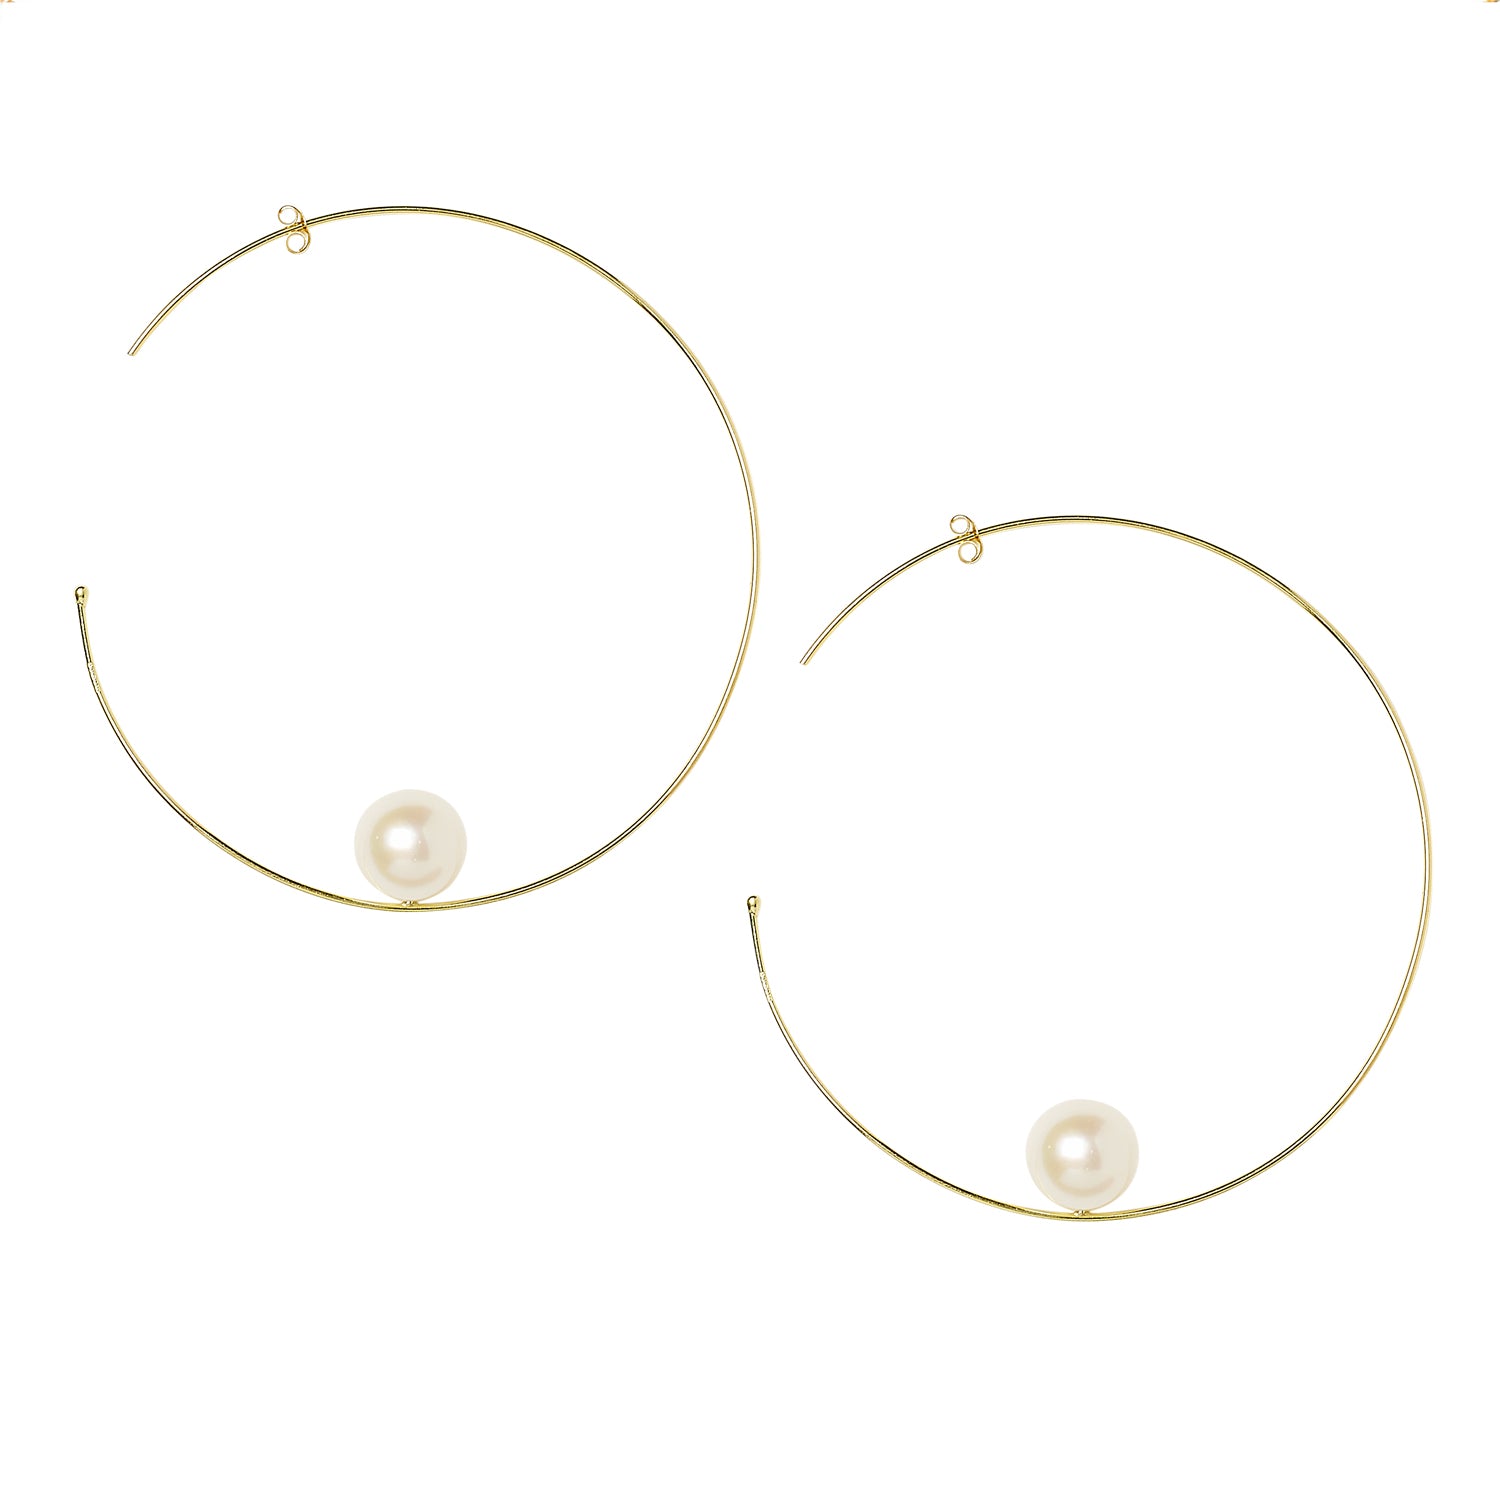 18ct yellow gold large fine hoops with floating white fresh water pearls